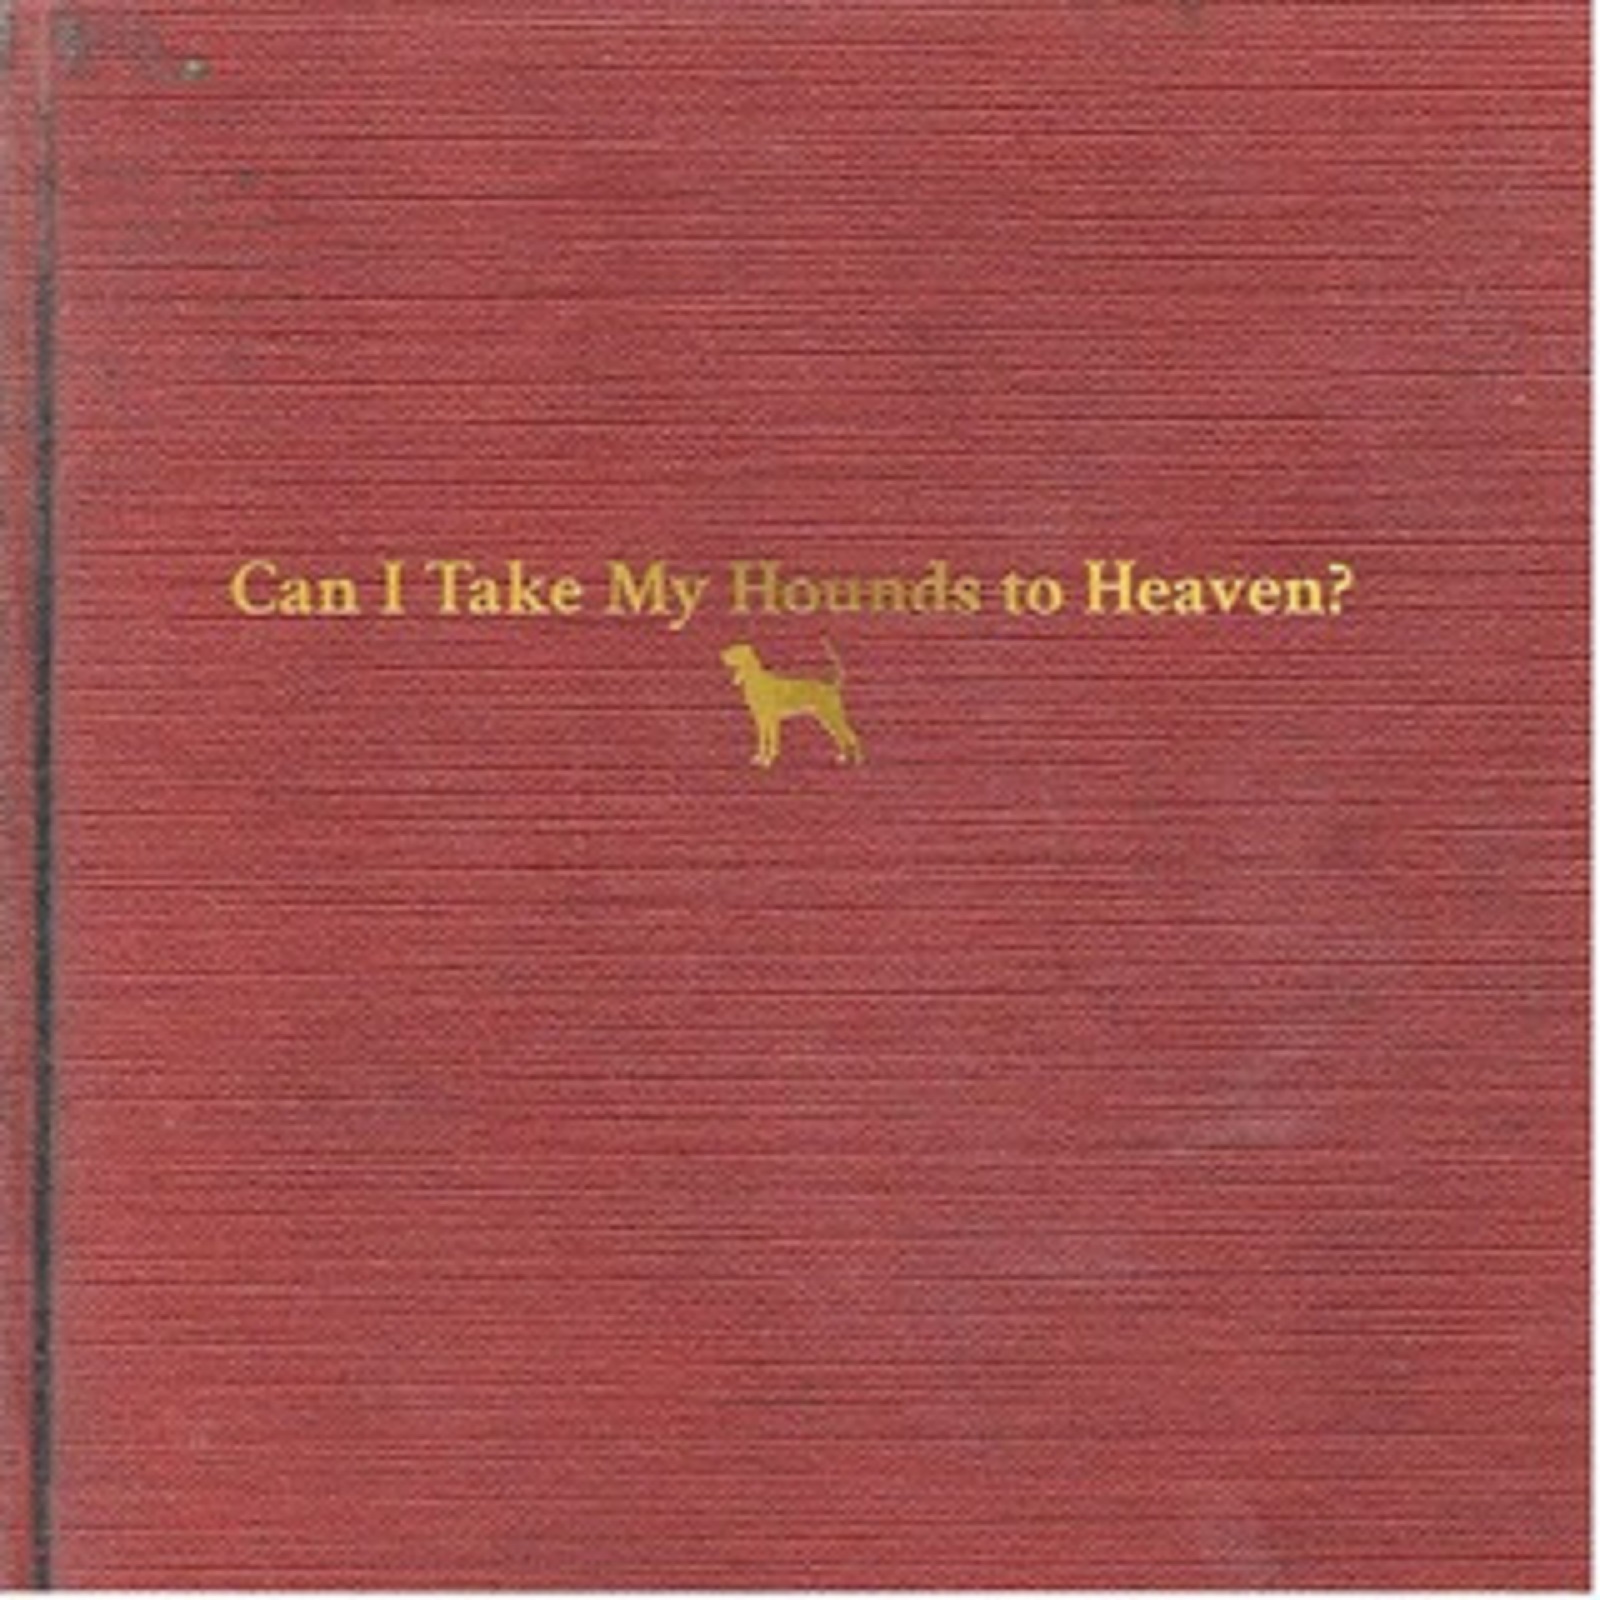 Tyler Childers and The Food Stamps’ new triple album "Can I Take My Hounds to Heaven?" out today